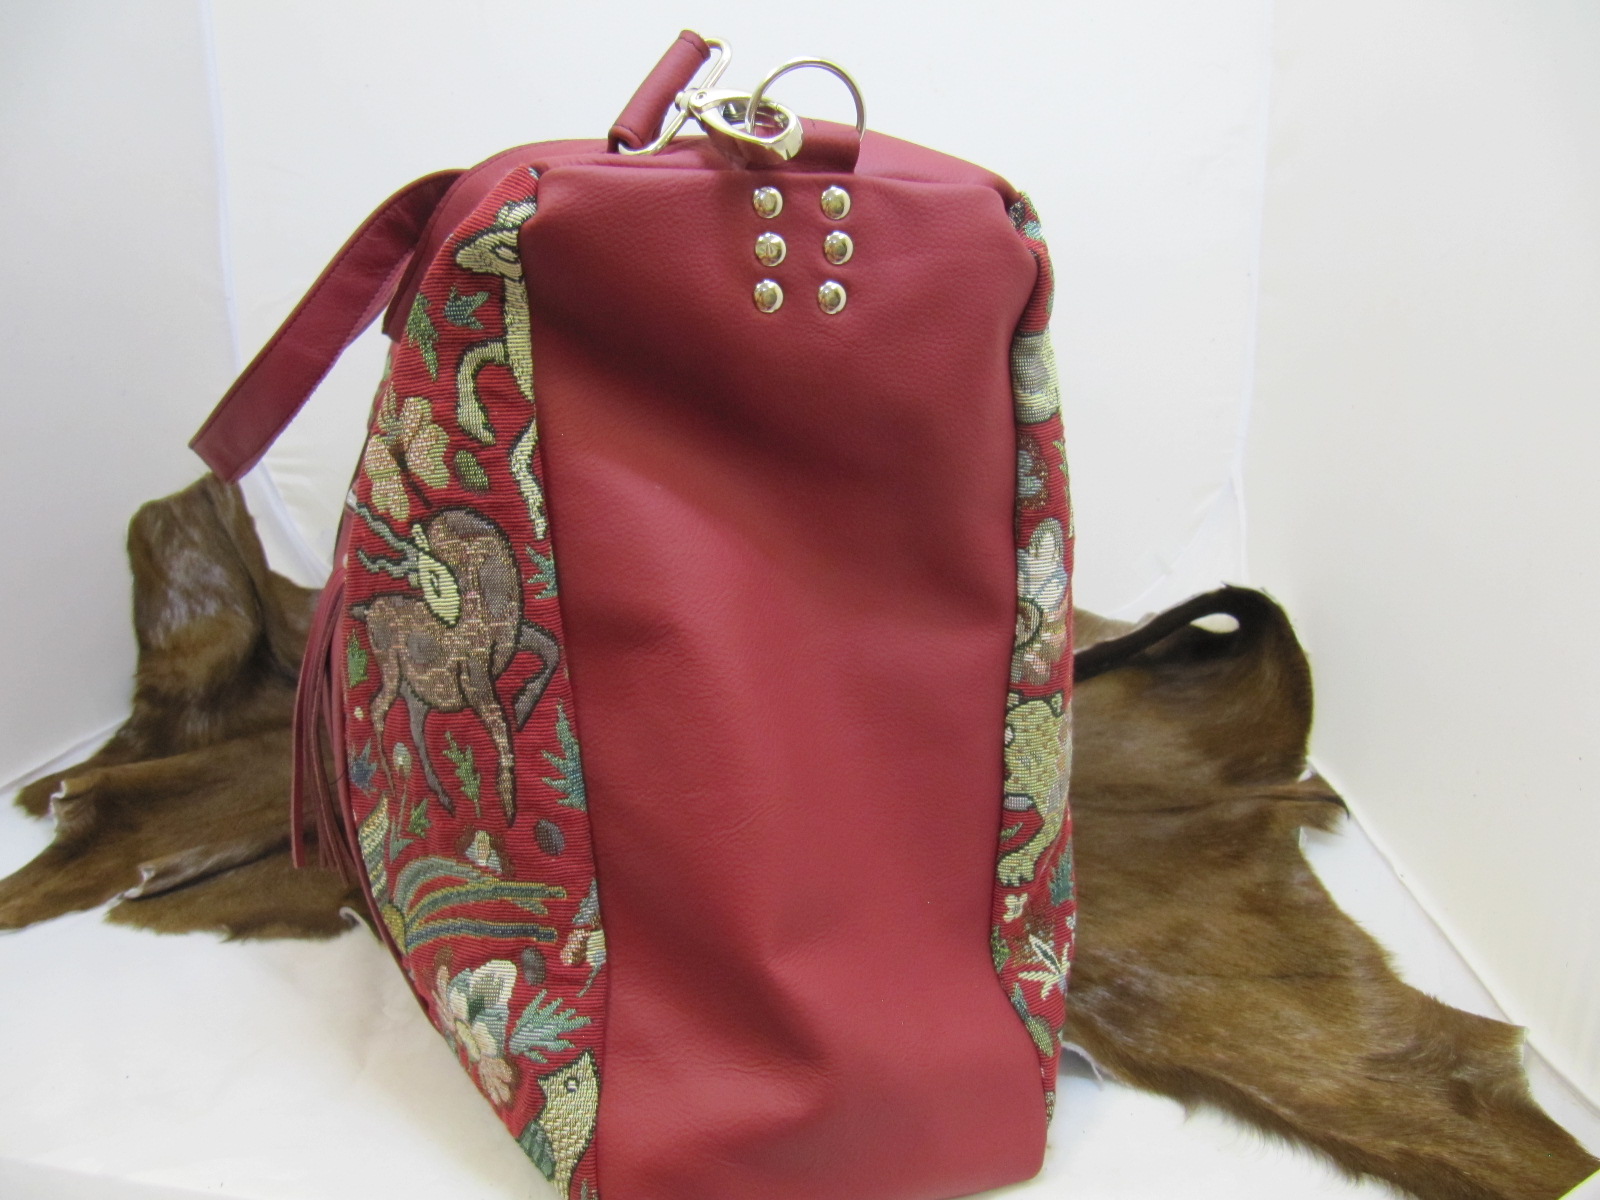 Flight Travel bag in Mediaeval Tapestry fabric and red leather